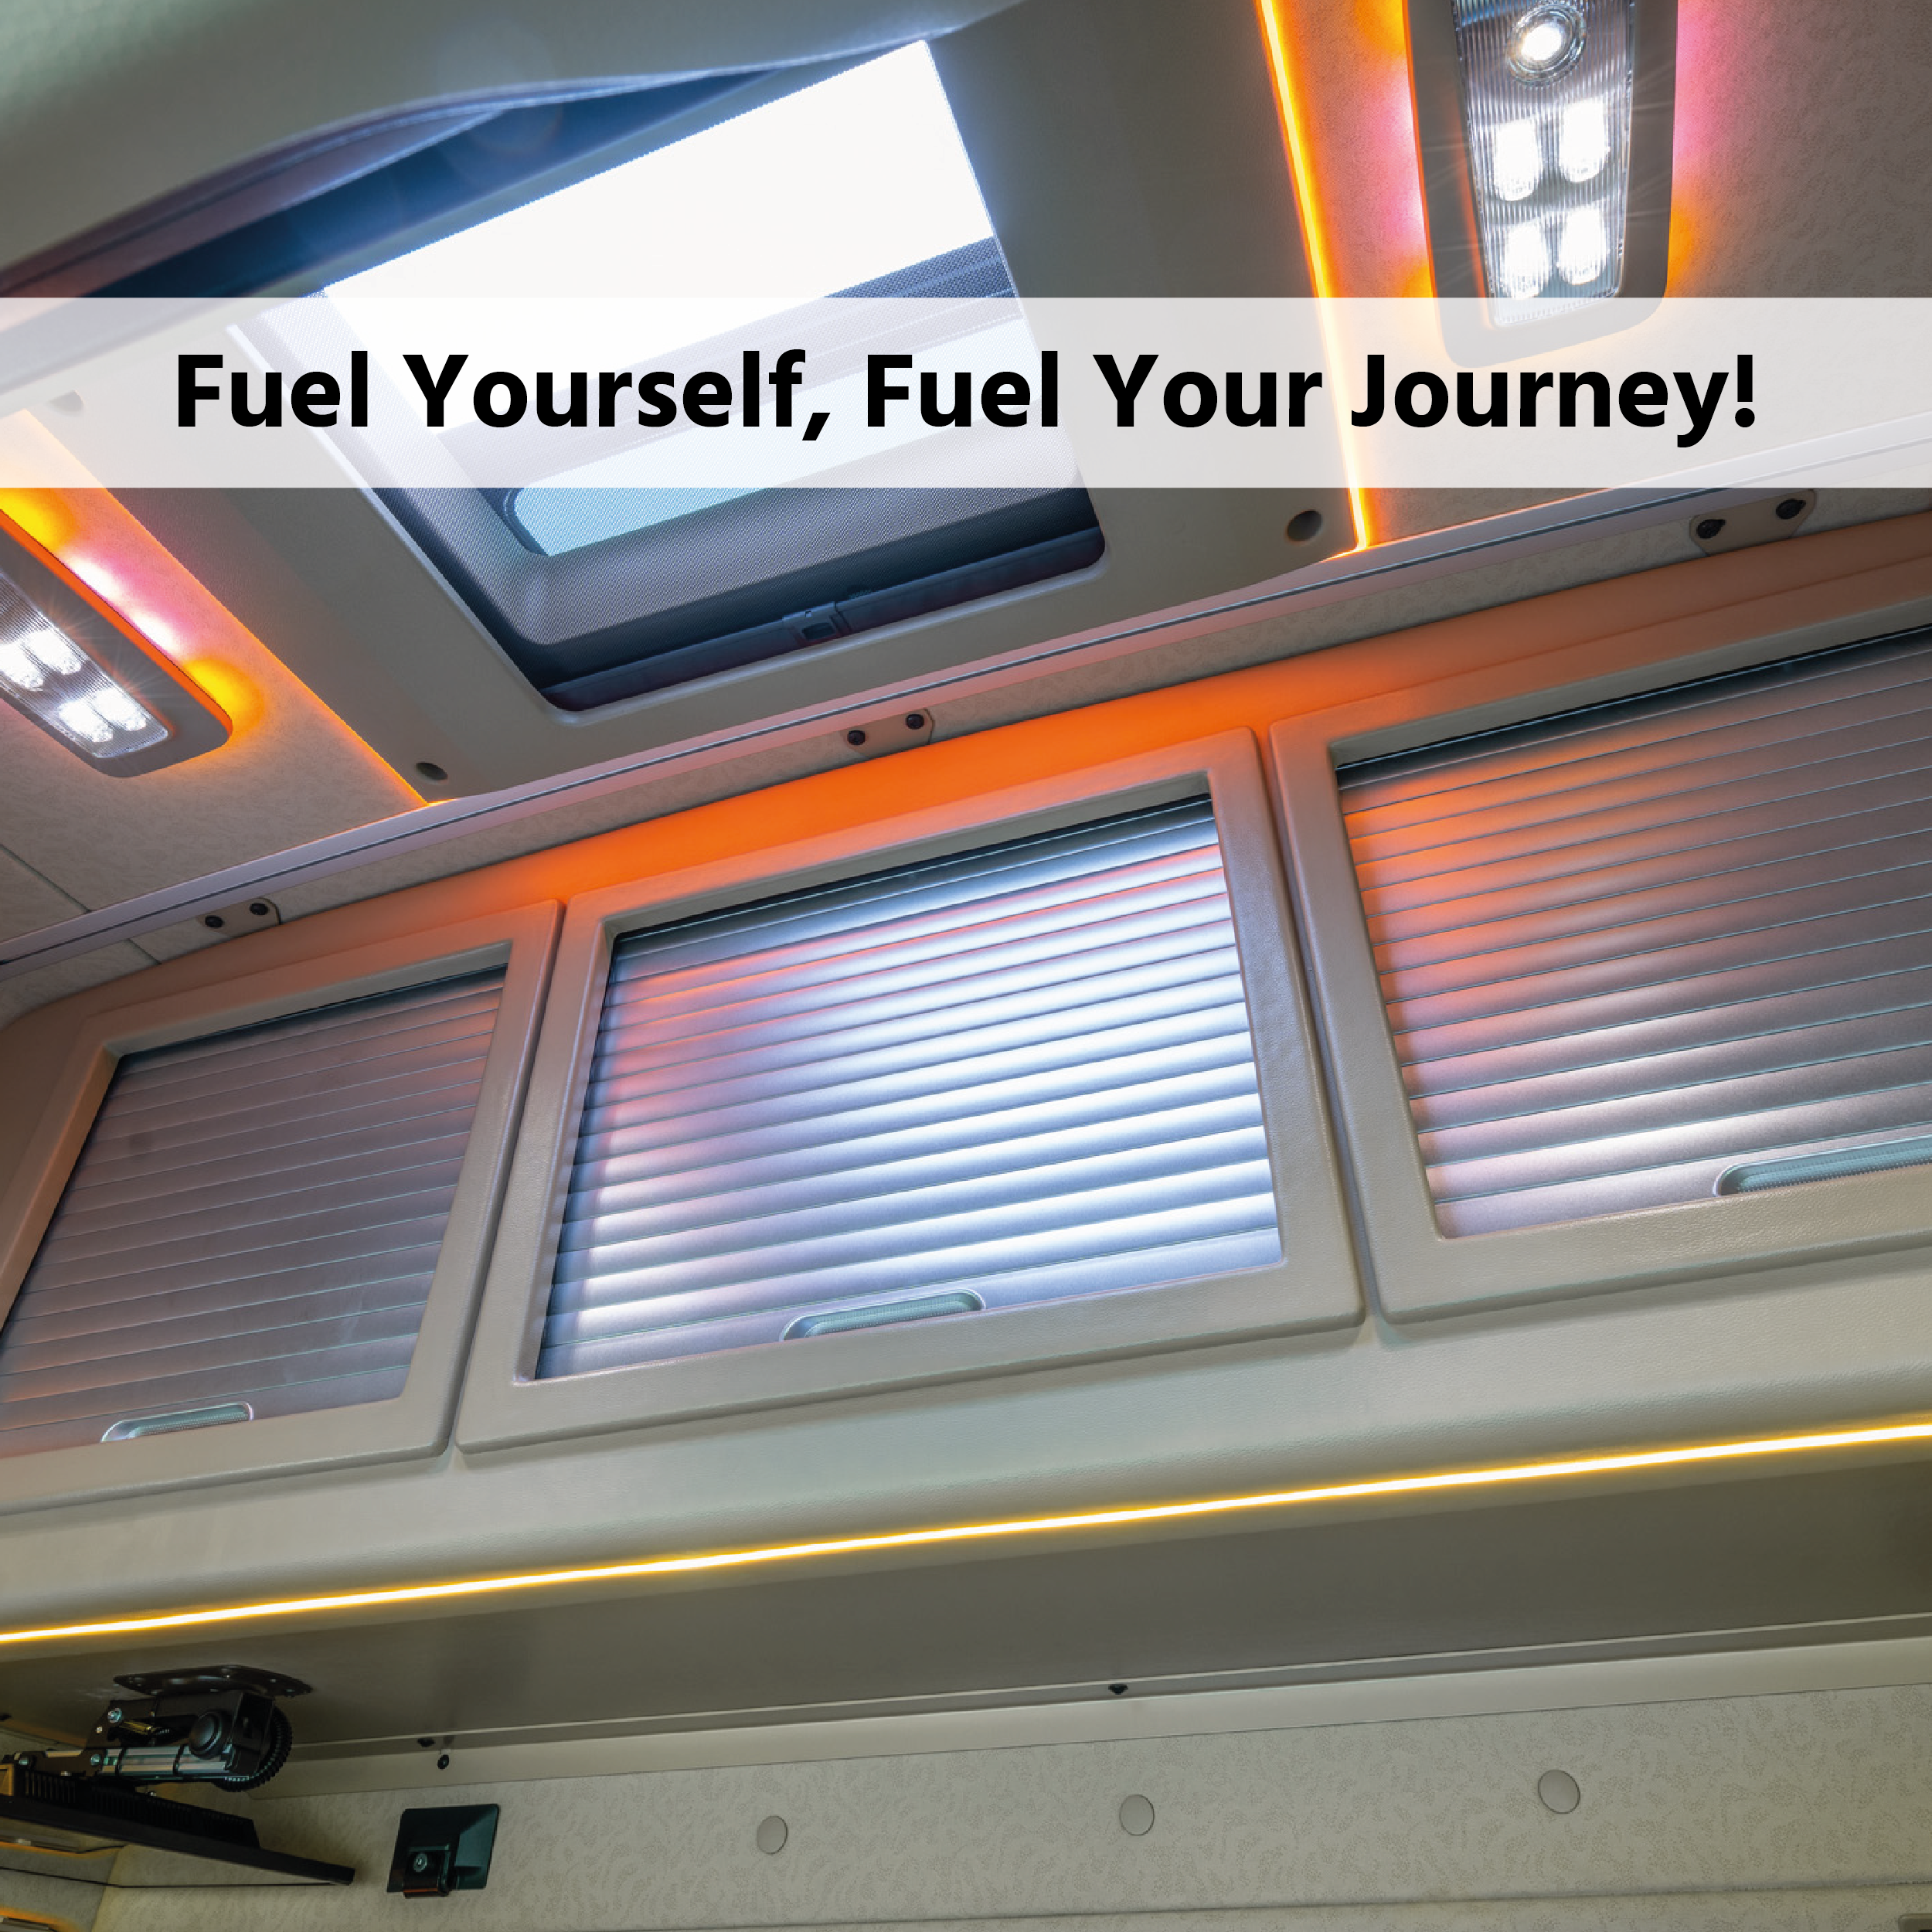 Image of Fuel Yourself, Fuel Your Journey!